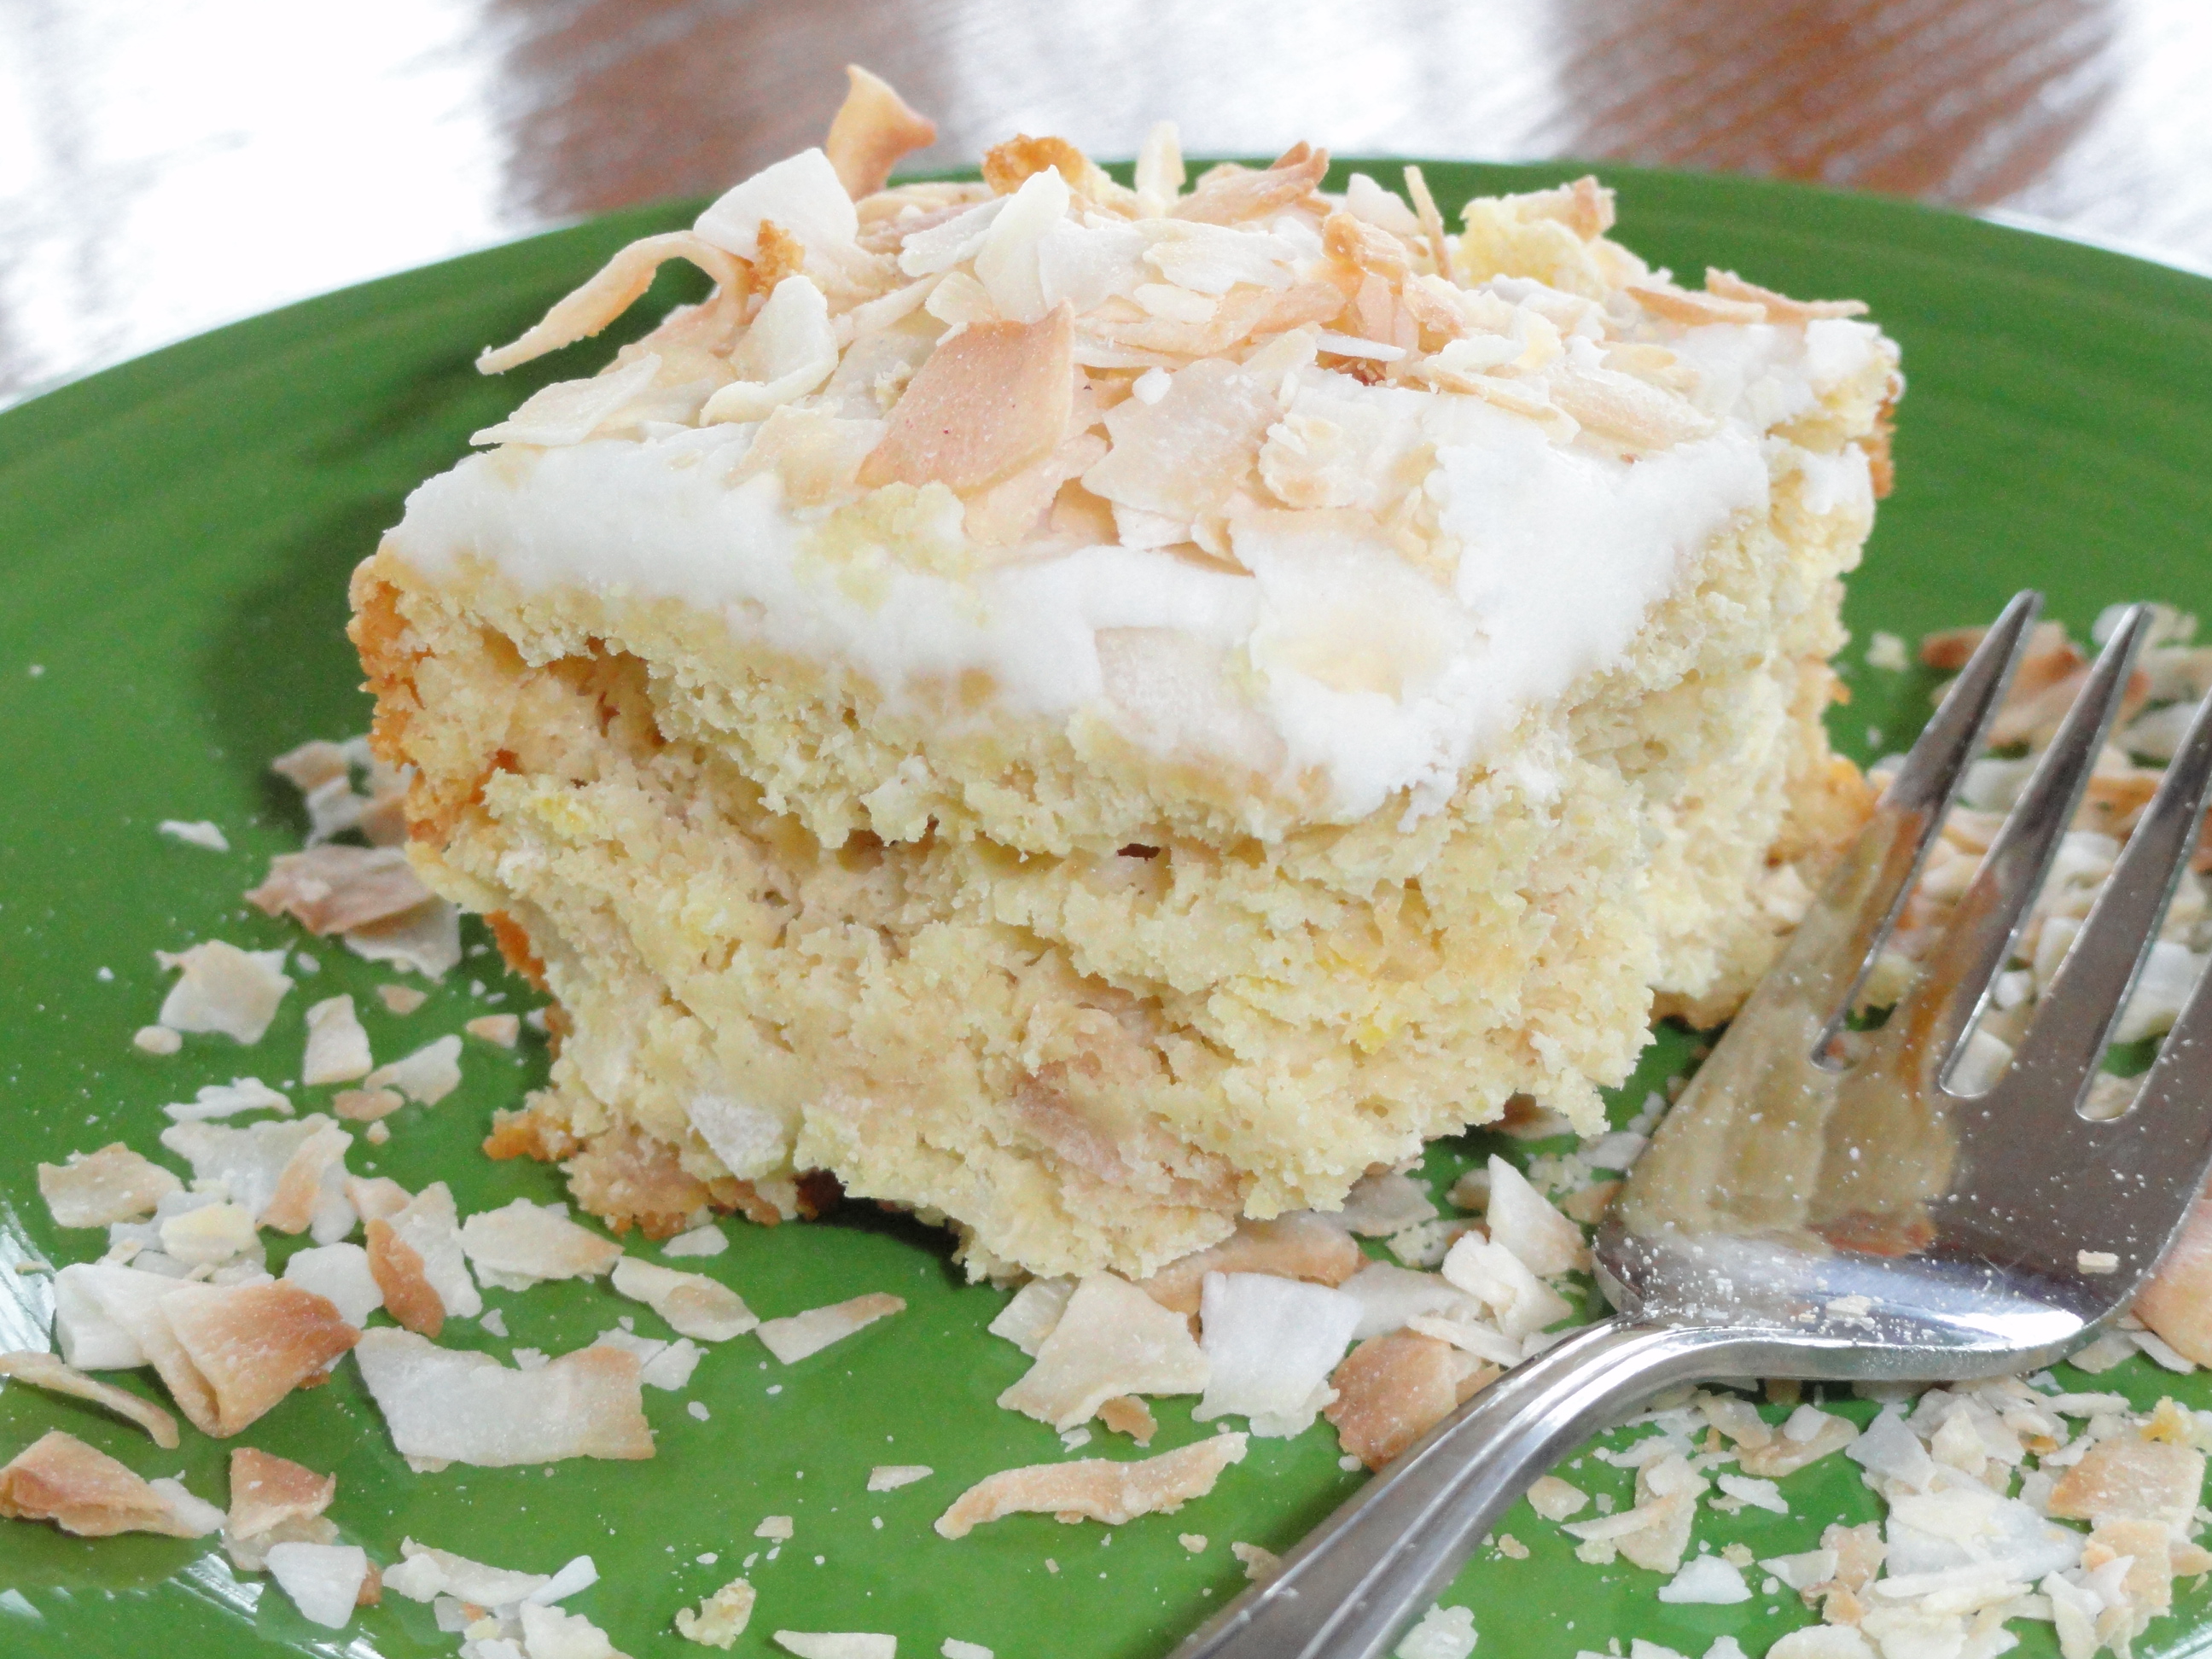 Thumbnail for Low Carb Lime Frosting